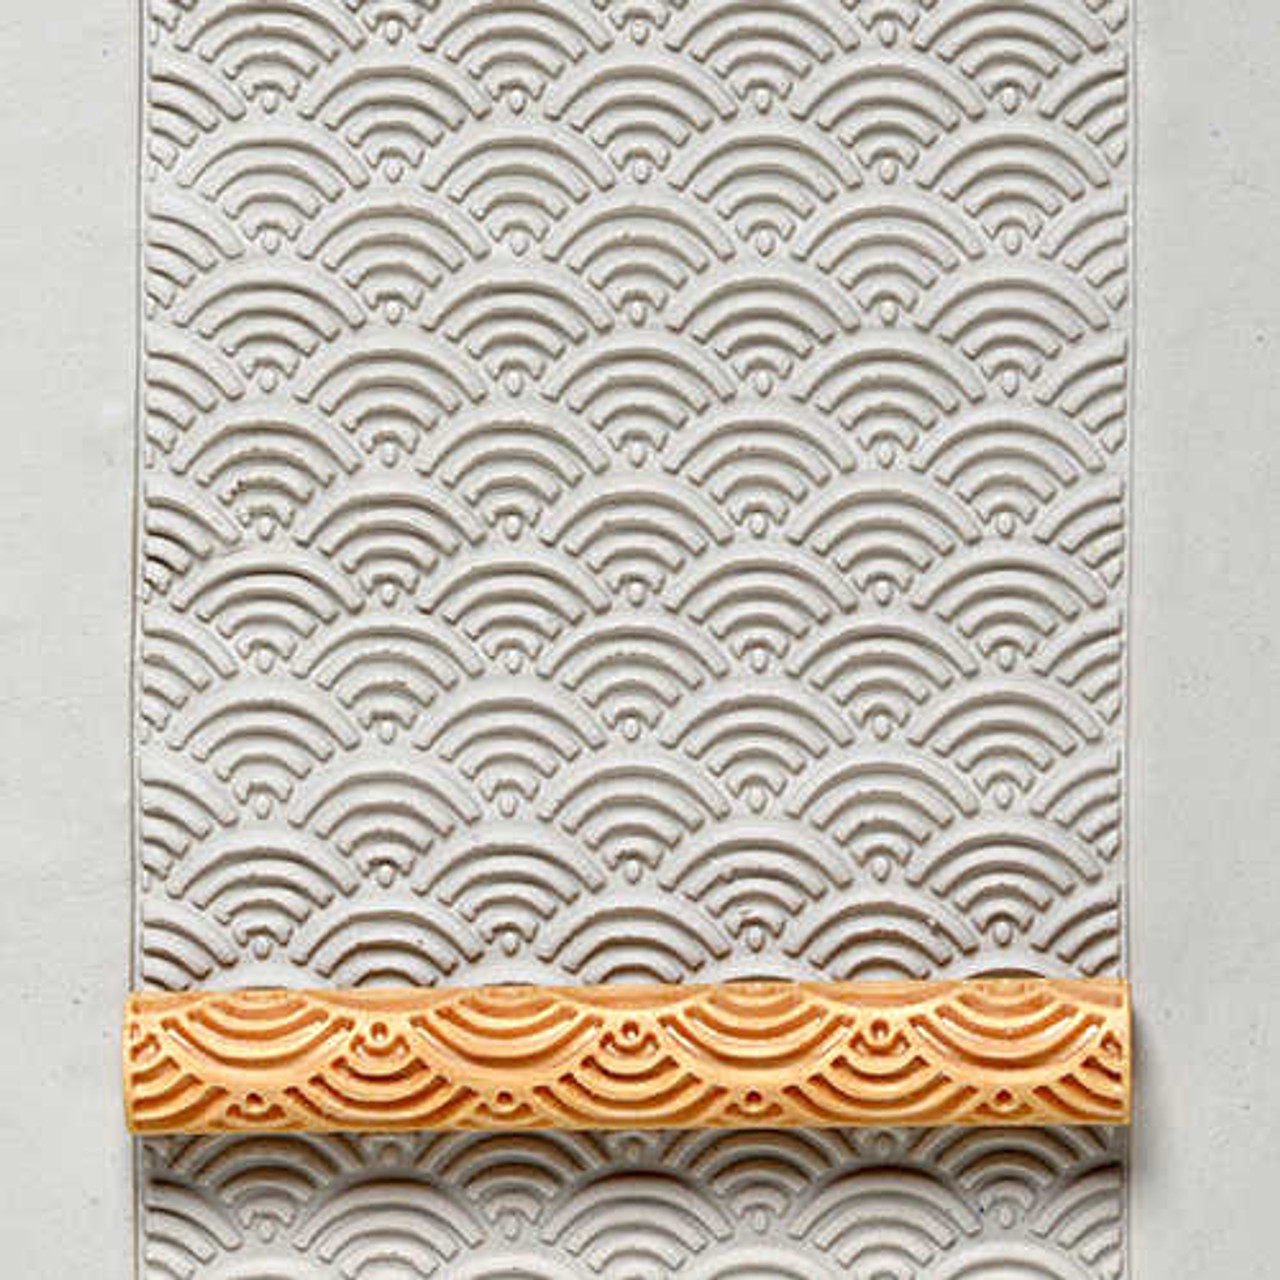 ZigZag Texture Roller, Clay Texture rolling pin, Clay pattern hand roller